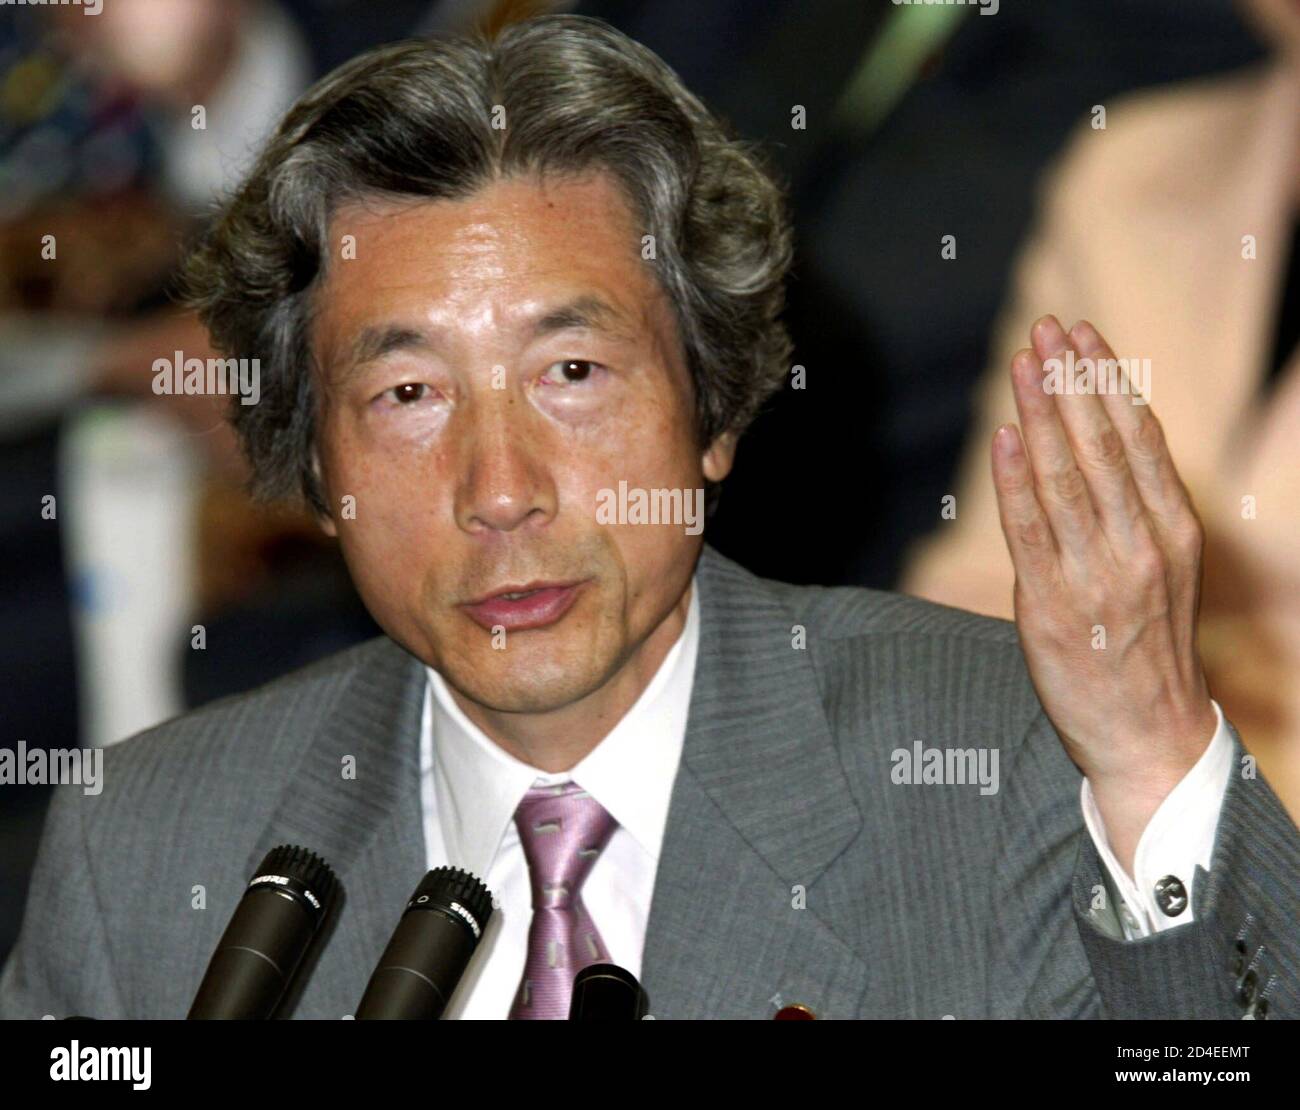 Japan's Prime Minister Junichiro Koizumi speaks at a Lower House budget committee session of parliament in Tokyo October 24, 2002. Risking a revolt in his own party, Koizumi stood firm in support of his besieged banking regulators on Thursday, backed by signs the Bank of Japan would help ease the pain of tough reforms. REUTERS/Toshiyuki Aizawa  TA/CP Stock Photo